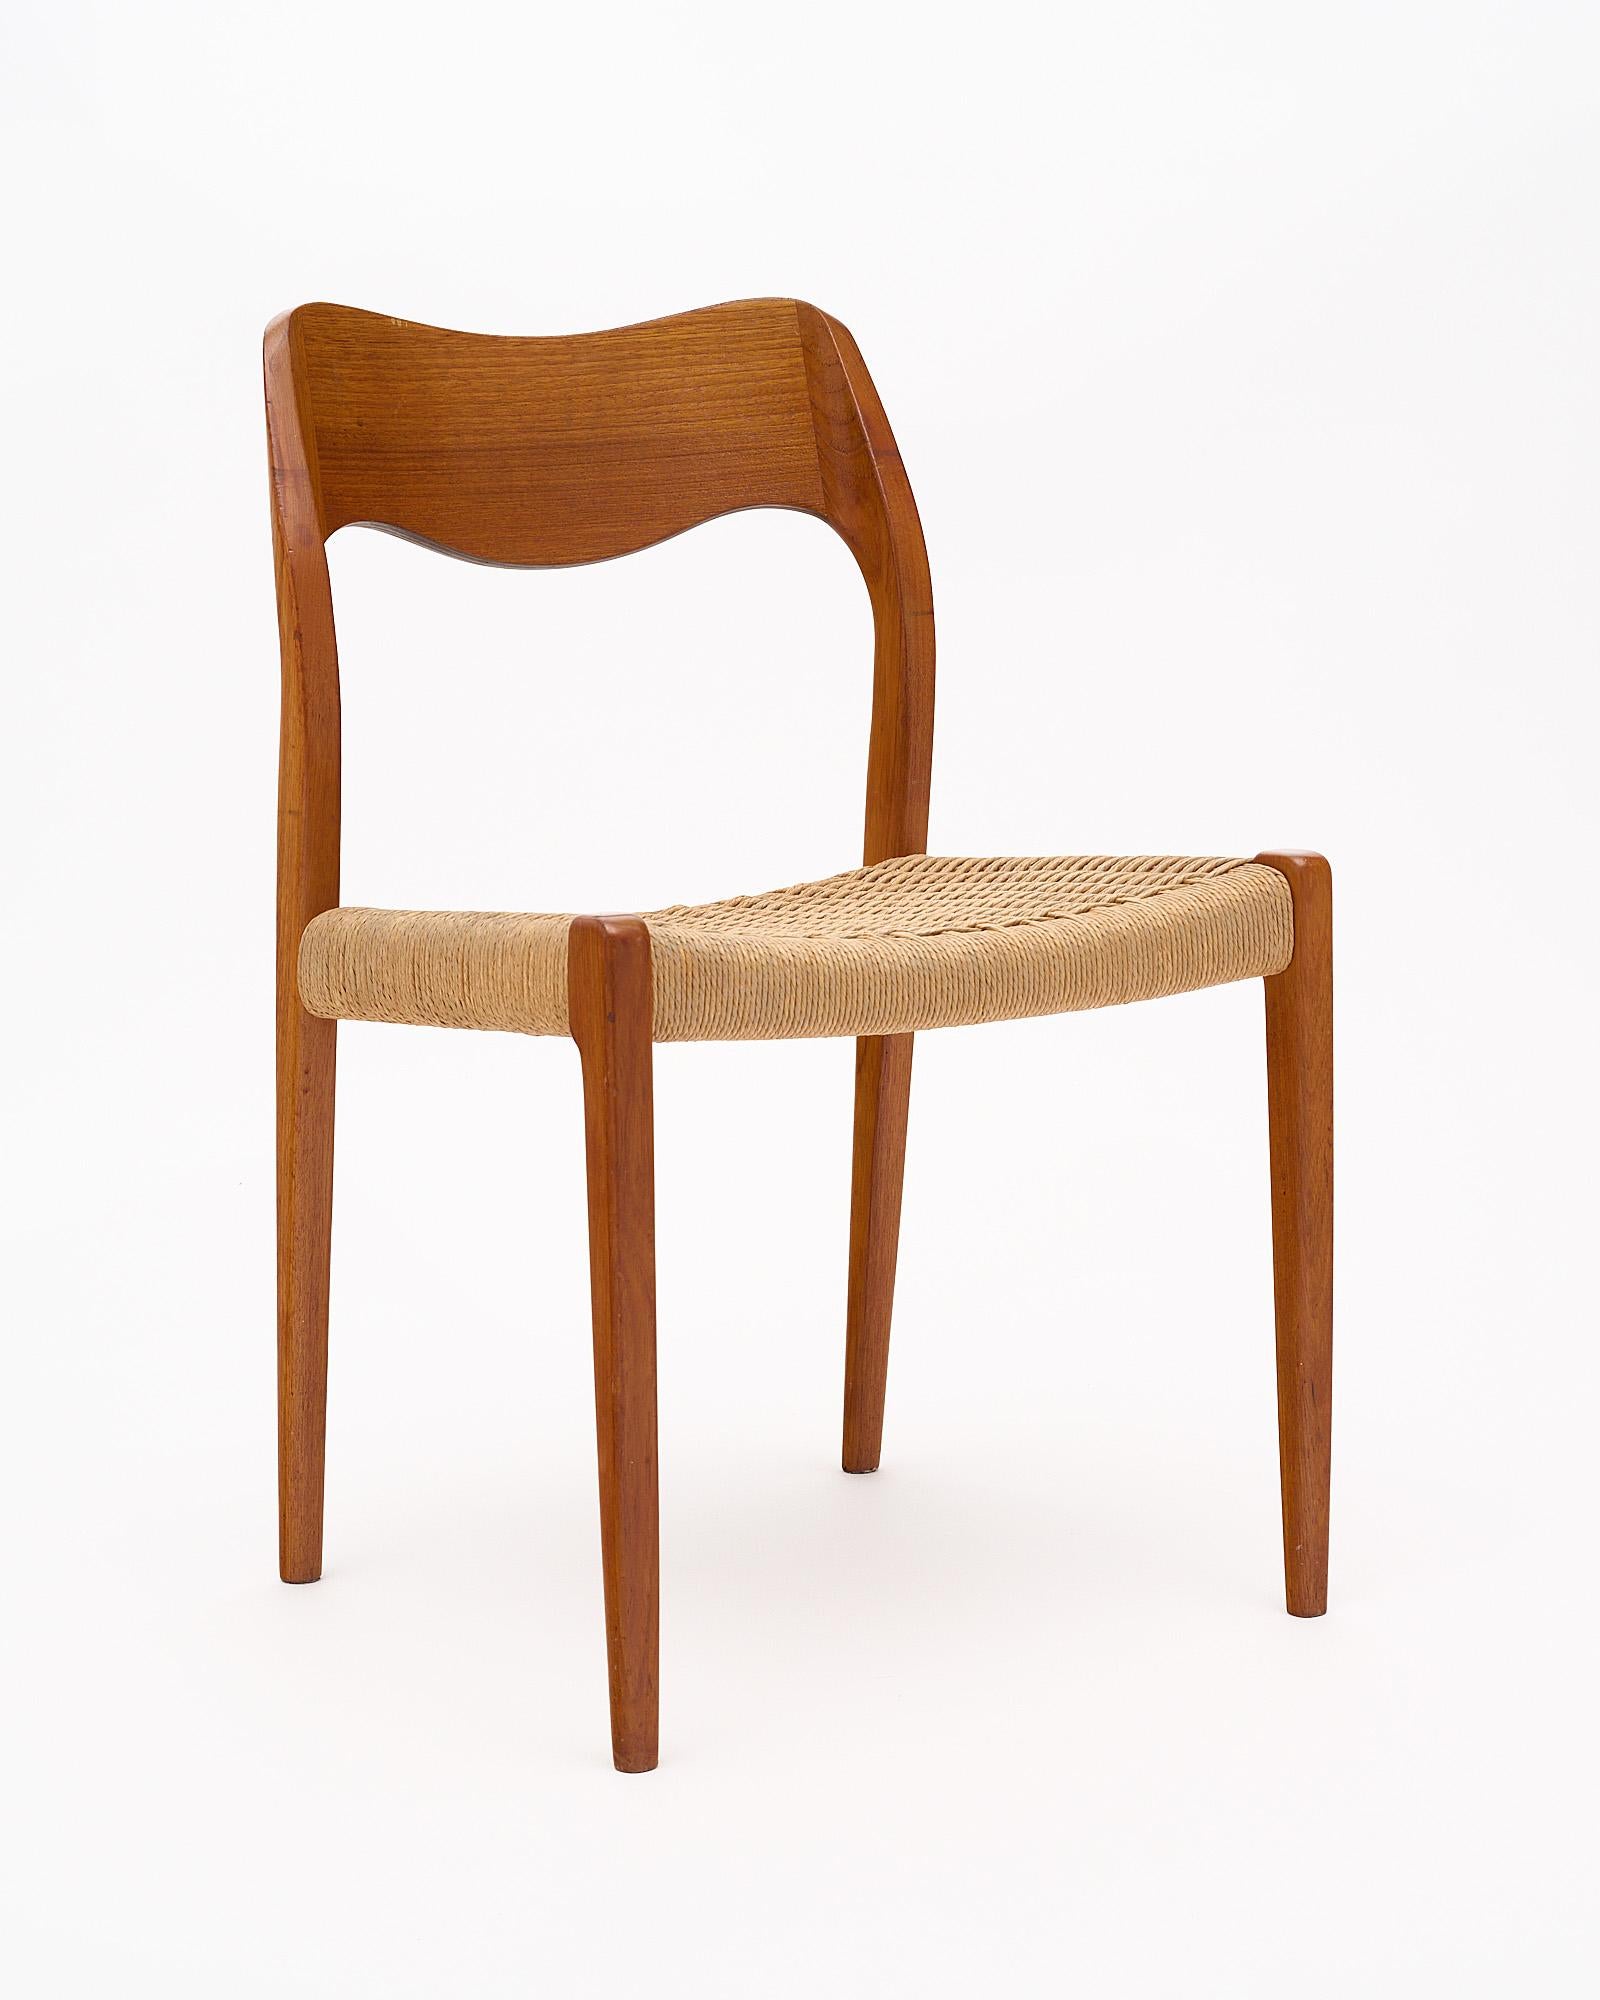 Set of twelve dining chairs by Niels Møller, Model No. 71. These chairs are made of solid teak with Danish cord seats. Designed in 1951 and produced by J. L. Möller Höjbjerg. The chairs feature a solid wood frame that is impeccably shaped. Møller